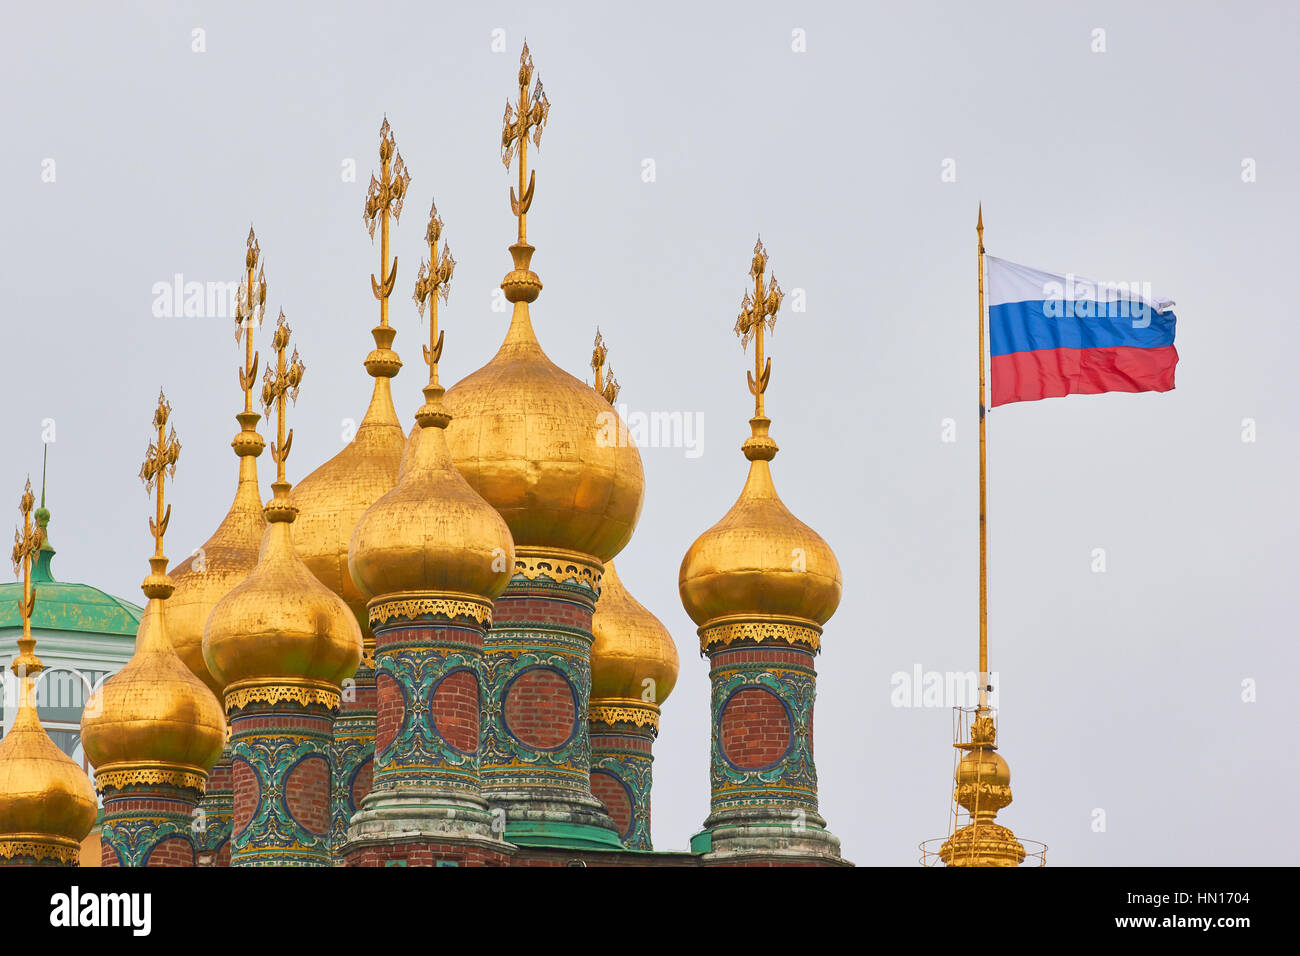 Cupolas of the Terem Palace Churches, Kremlin, Moscow, Russia Stock Photo